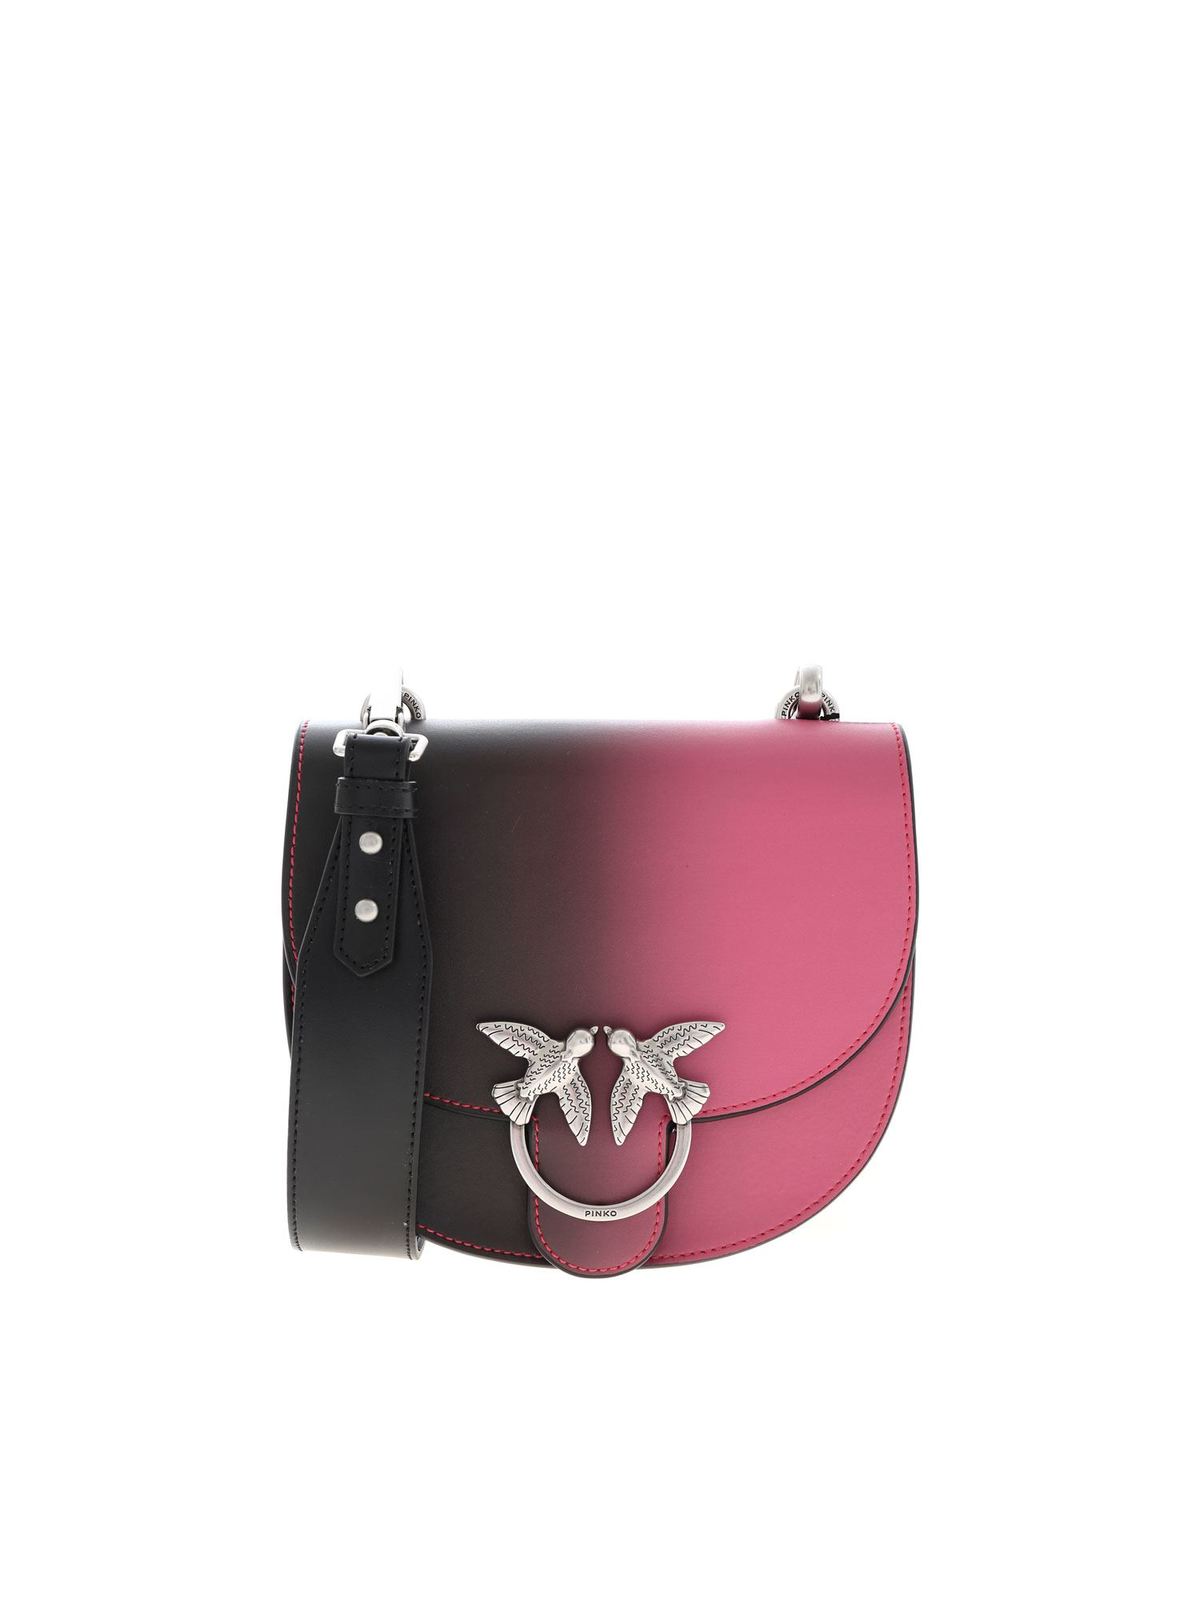 PINKO ROUND LOVE SHADE BAG IN BLACK AND PINK